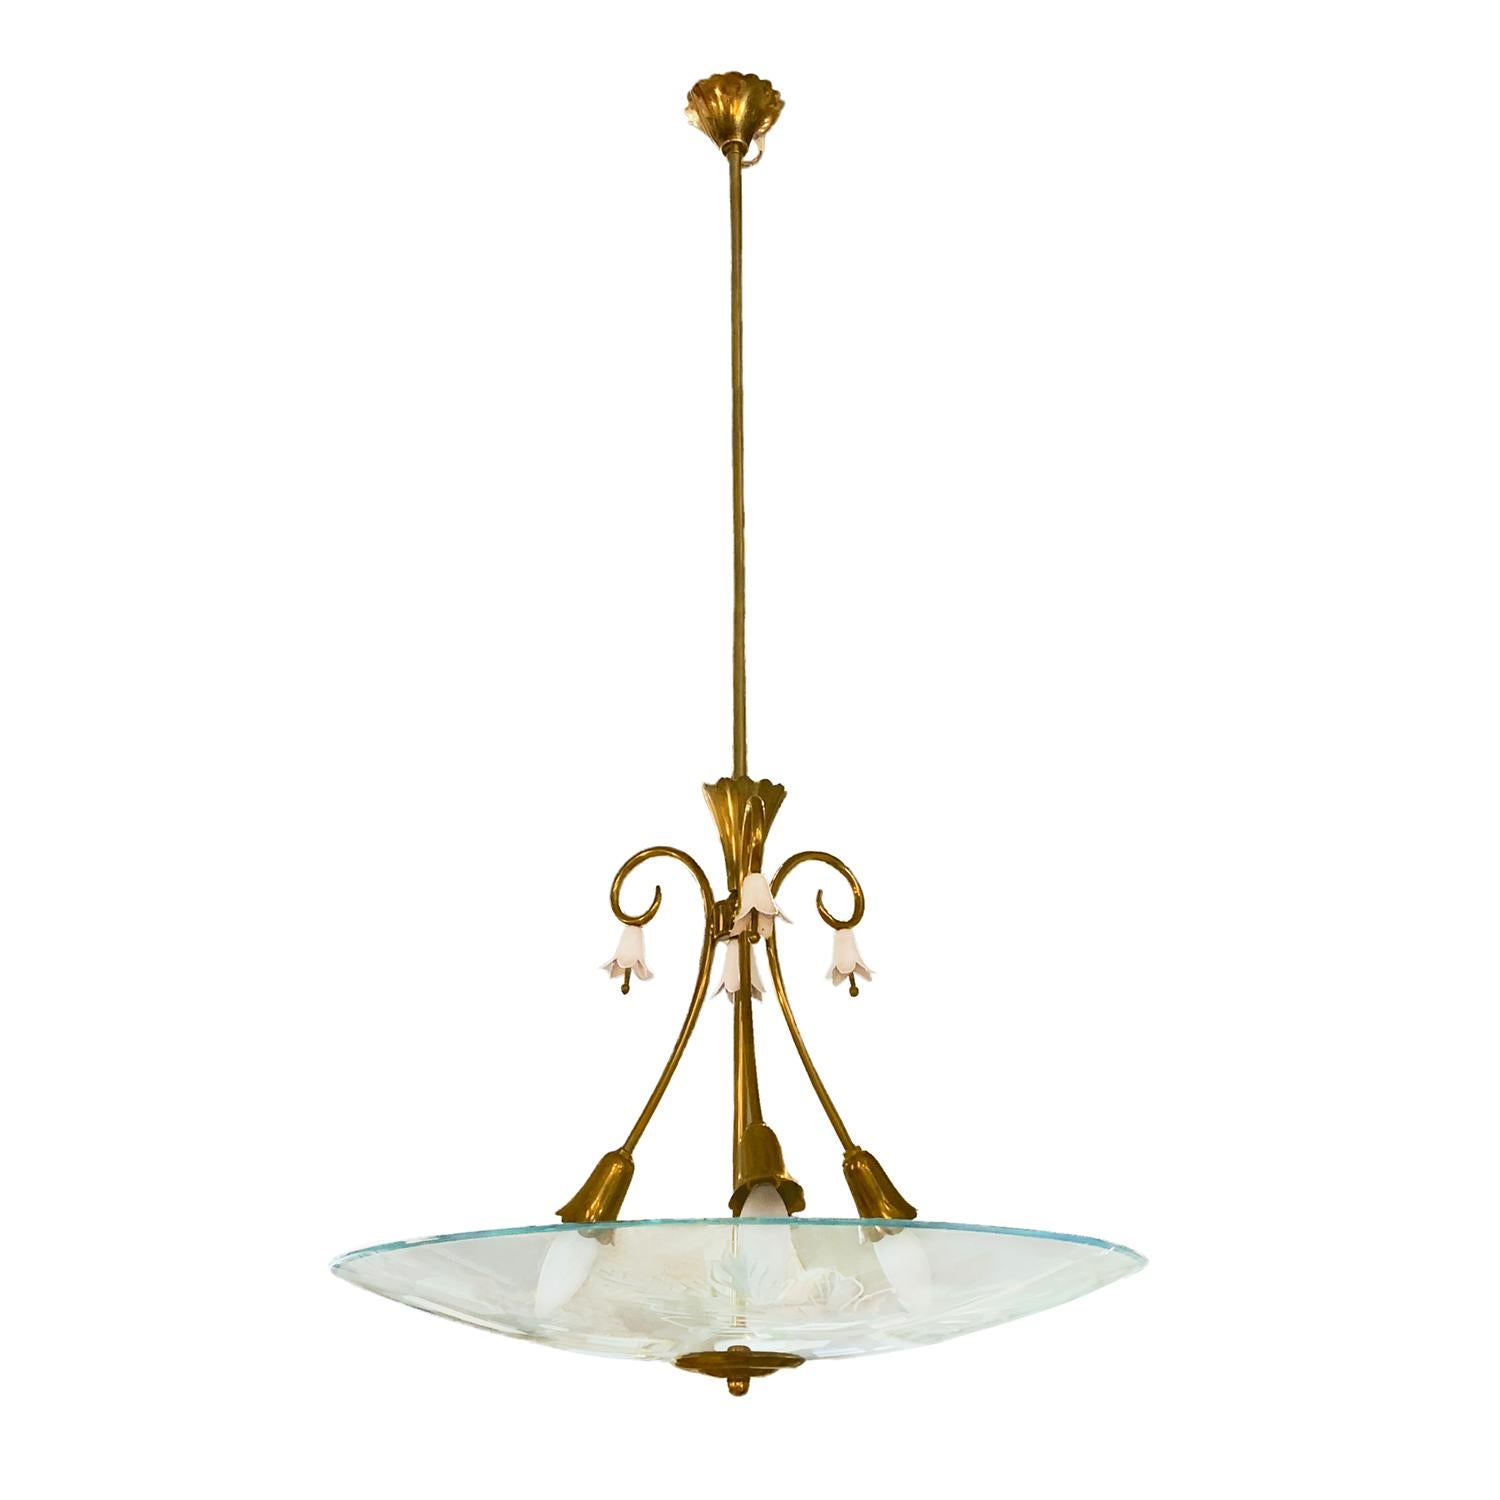 A vintage Mid-Century Modern Italian chandelier made of a brass structure and hand blown crystal glass, enhanced by partially etched details, featured with three light sockets. Designed by Pietro Chiesa and produced by FontanaArte in good condition.